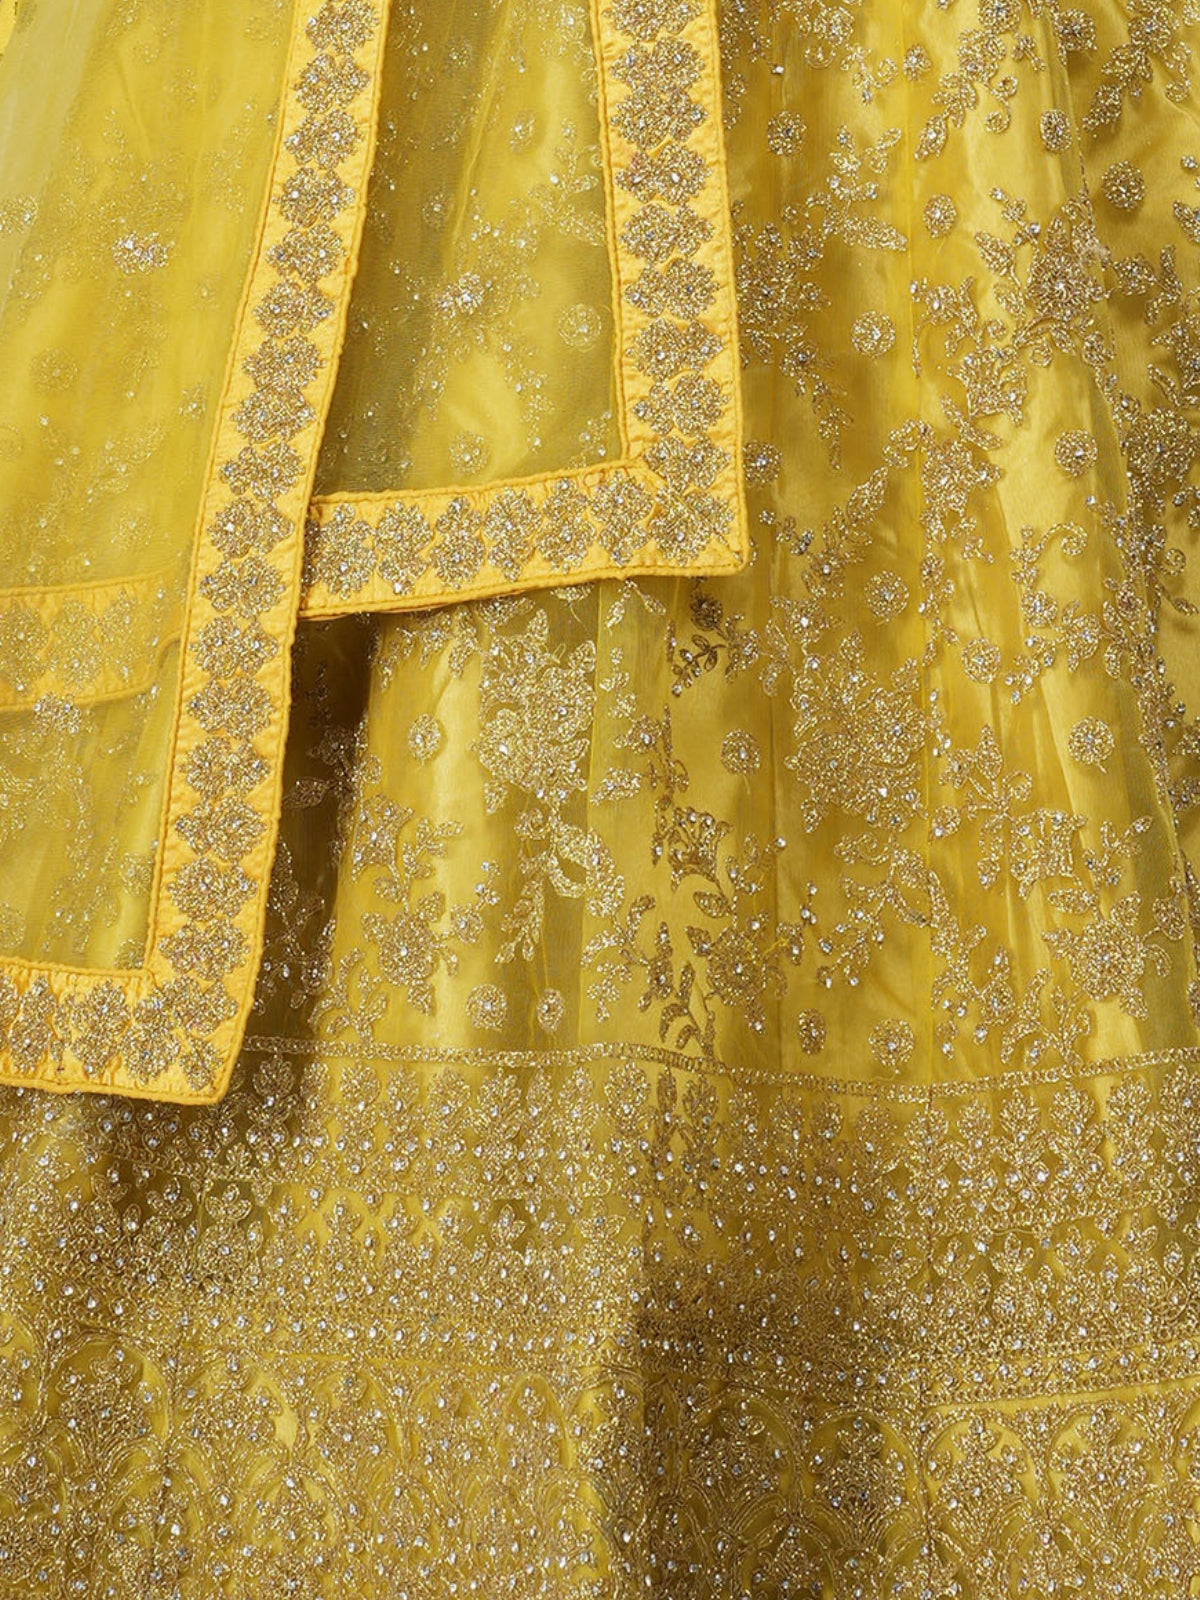 Odette Yellow Soft Net Bridal Semi Stitched  Lehenga With Unstitched Blouse For Women